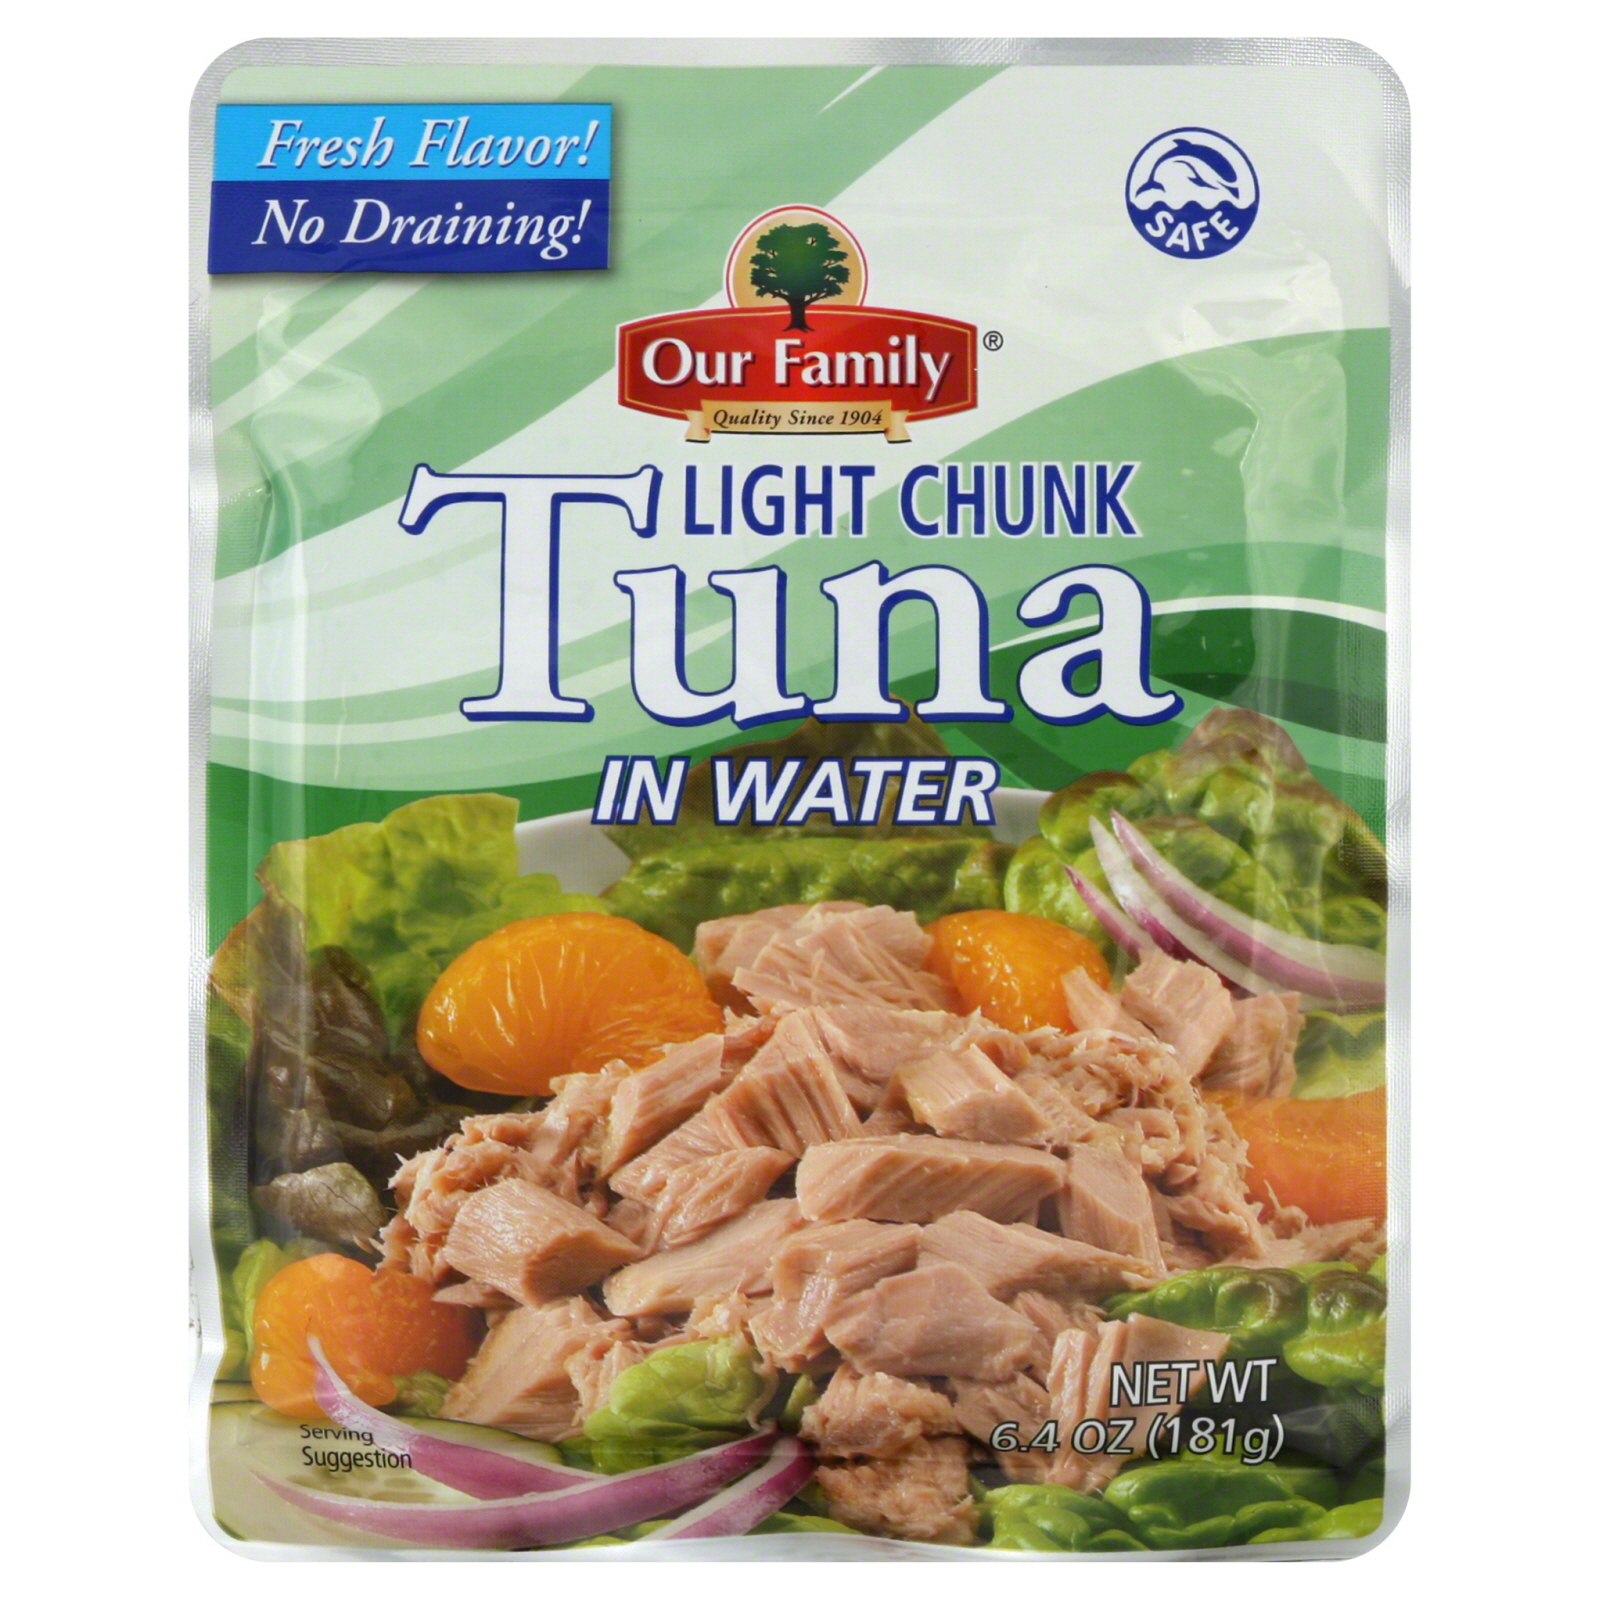 Our Family Tuna, Light Chunk, In Water, 6.4 oz (181 g)